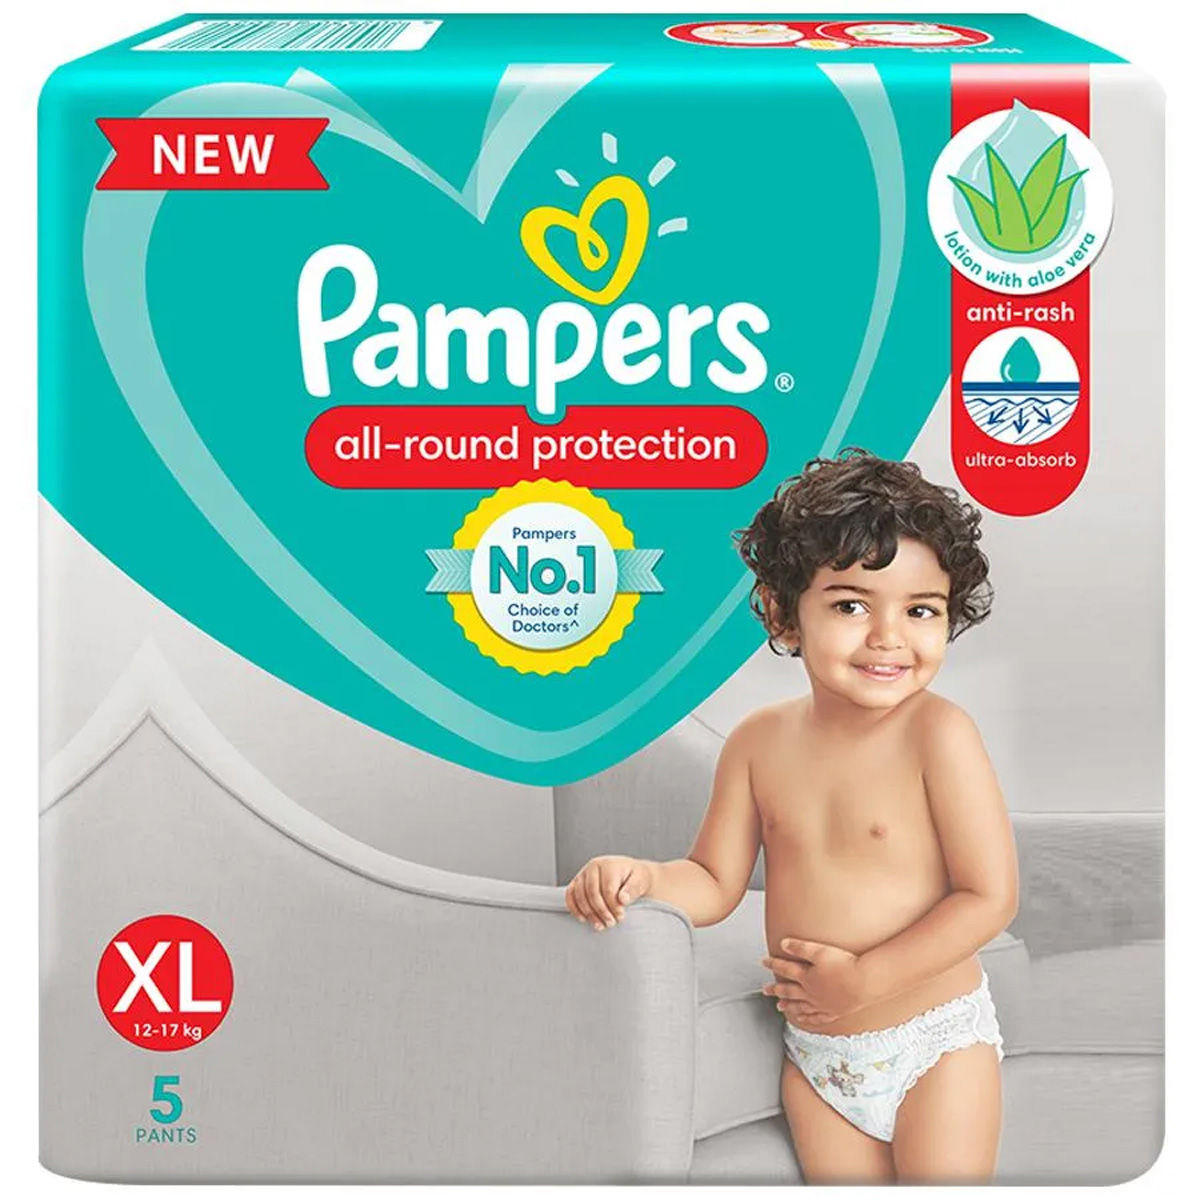 Pampers AllRound Protection Diaper Pants XL 56 Count